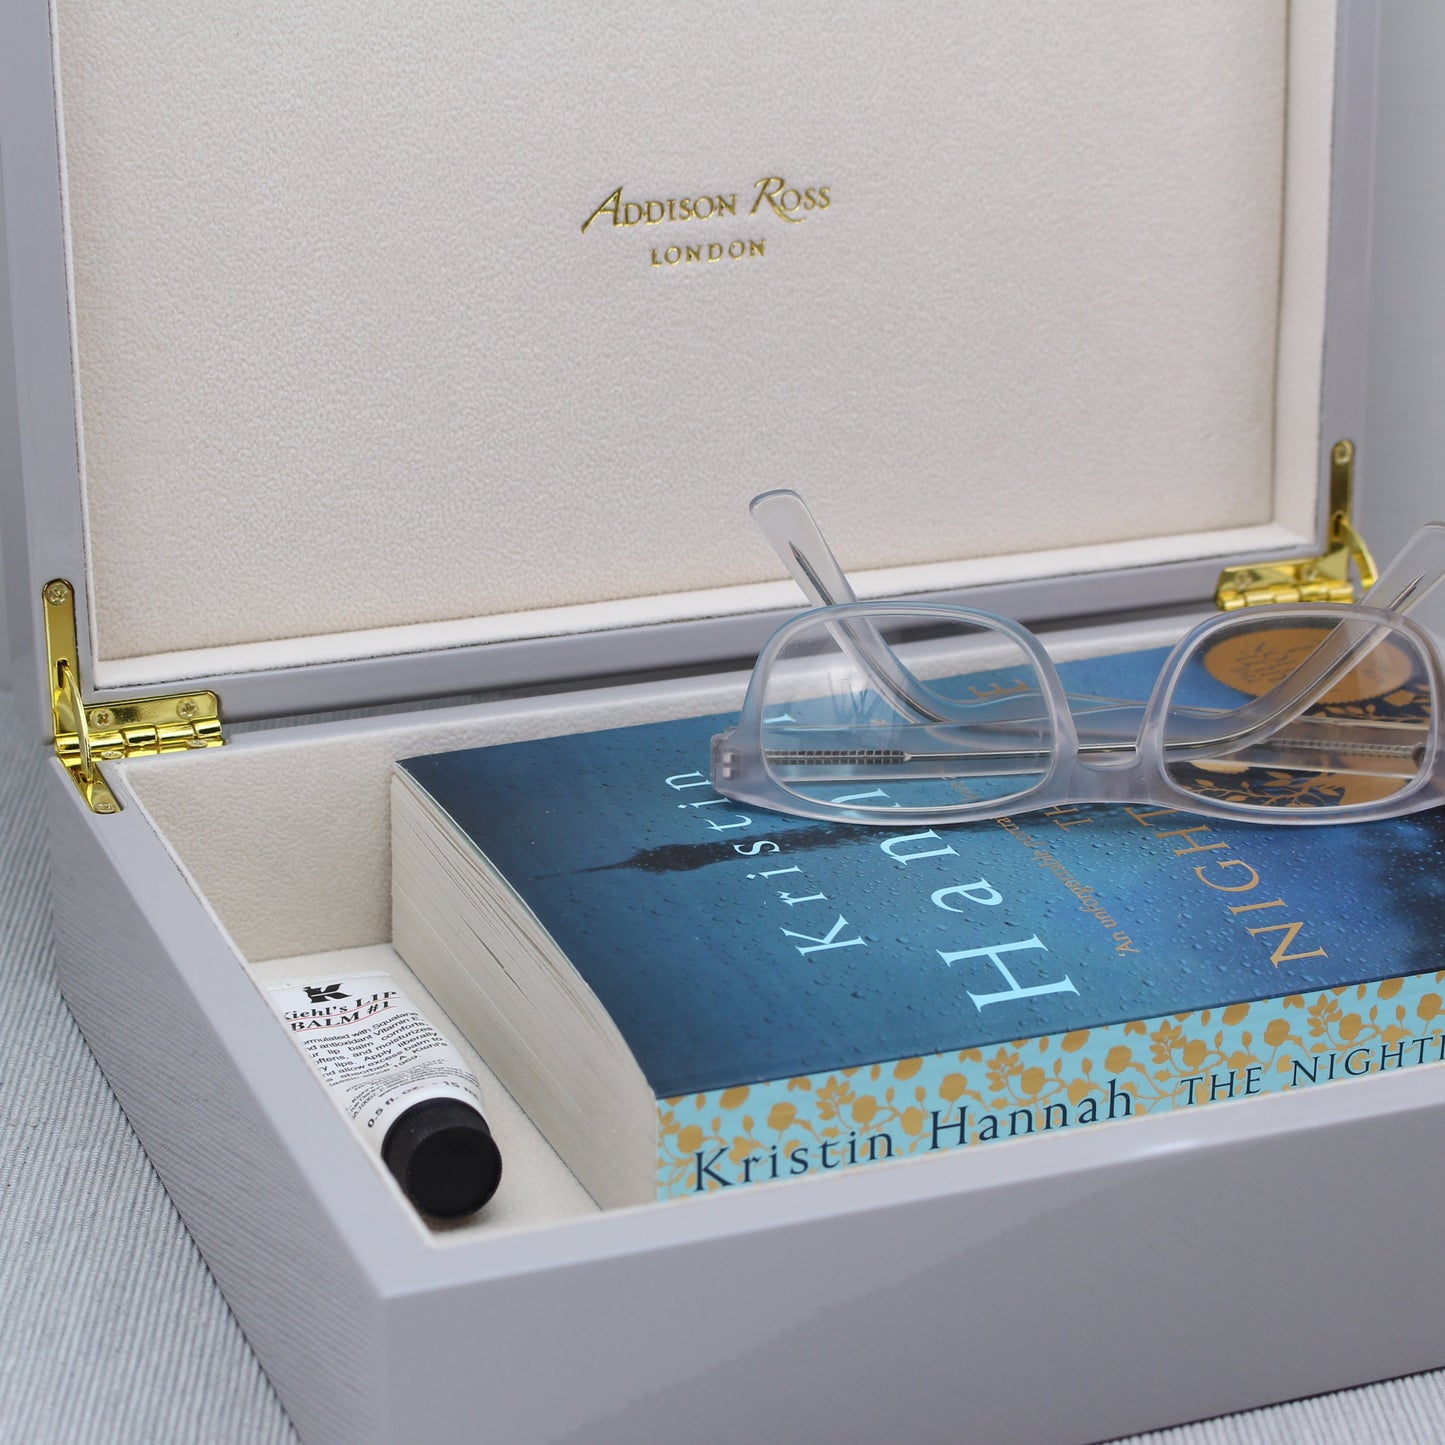 A book and reading glasses in a white storage box